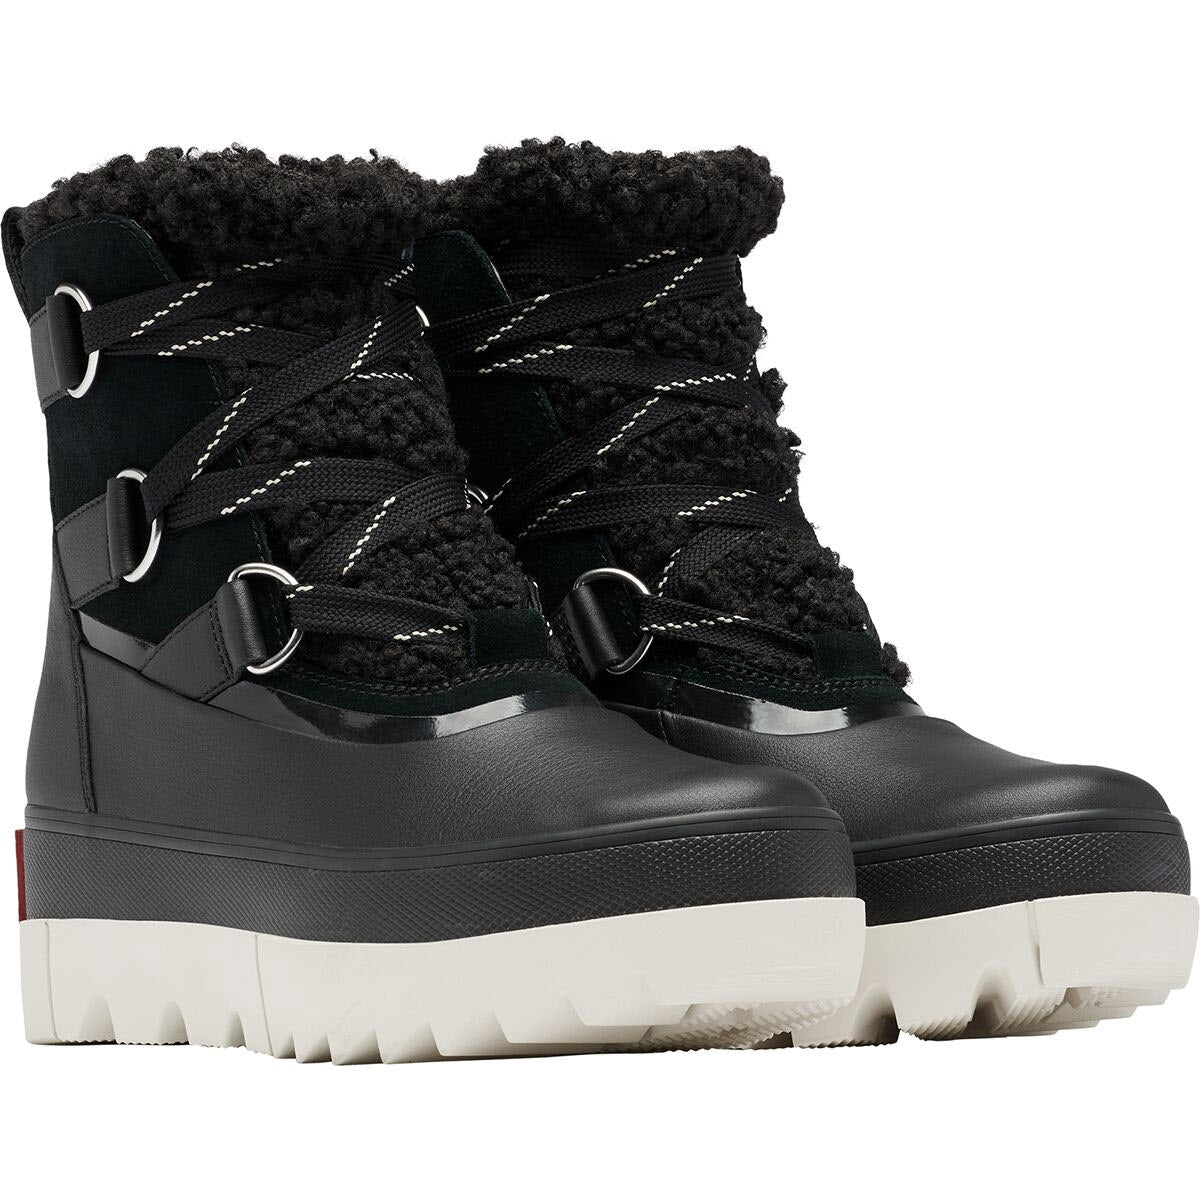 A pair of Sorel Joan of Arctic Next black winter boots with waterproof construction, featuring metallic eyelets and white stitching accents.